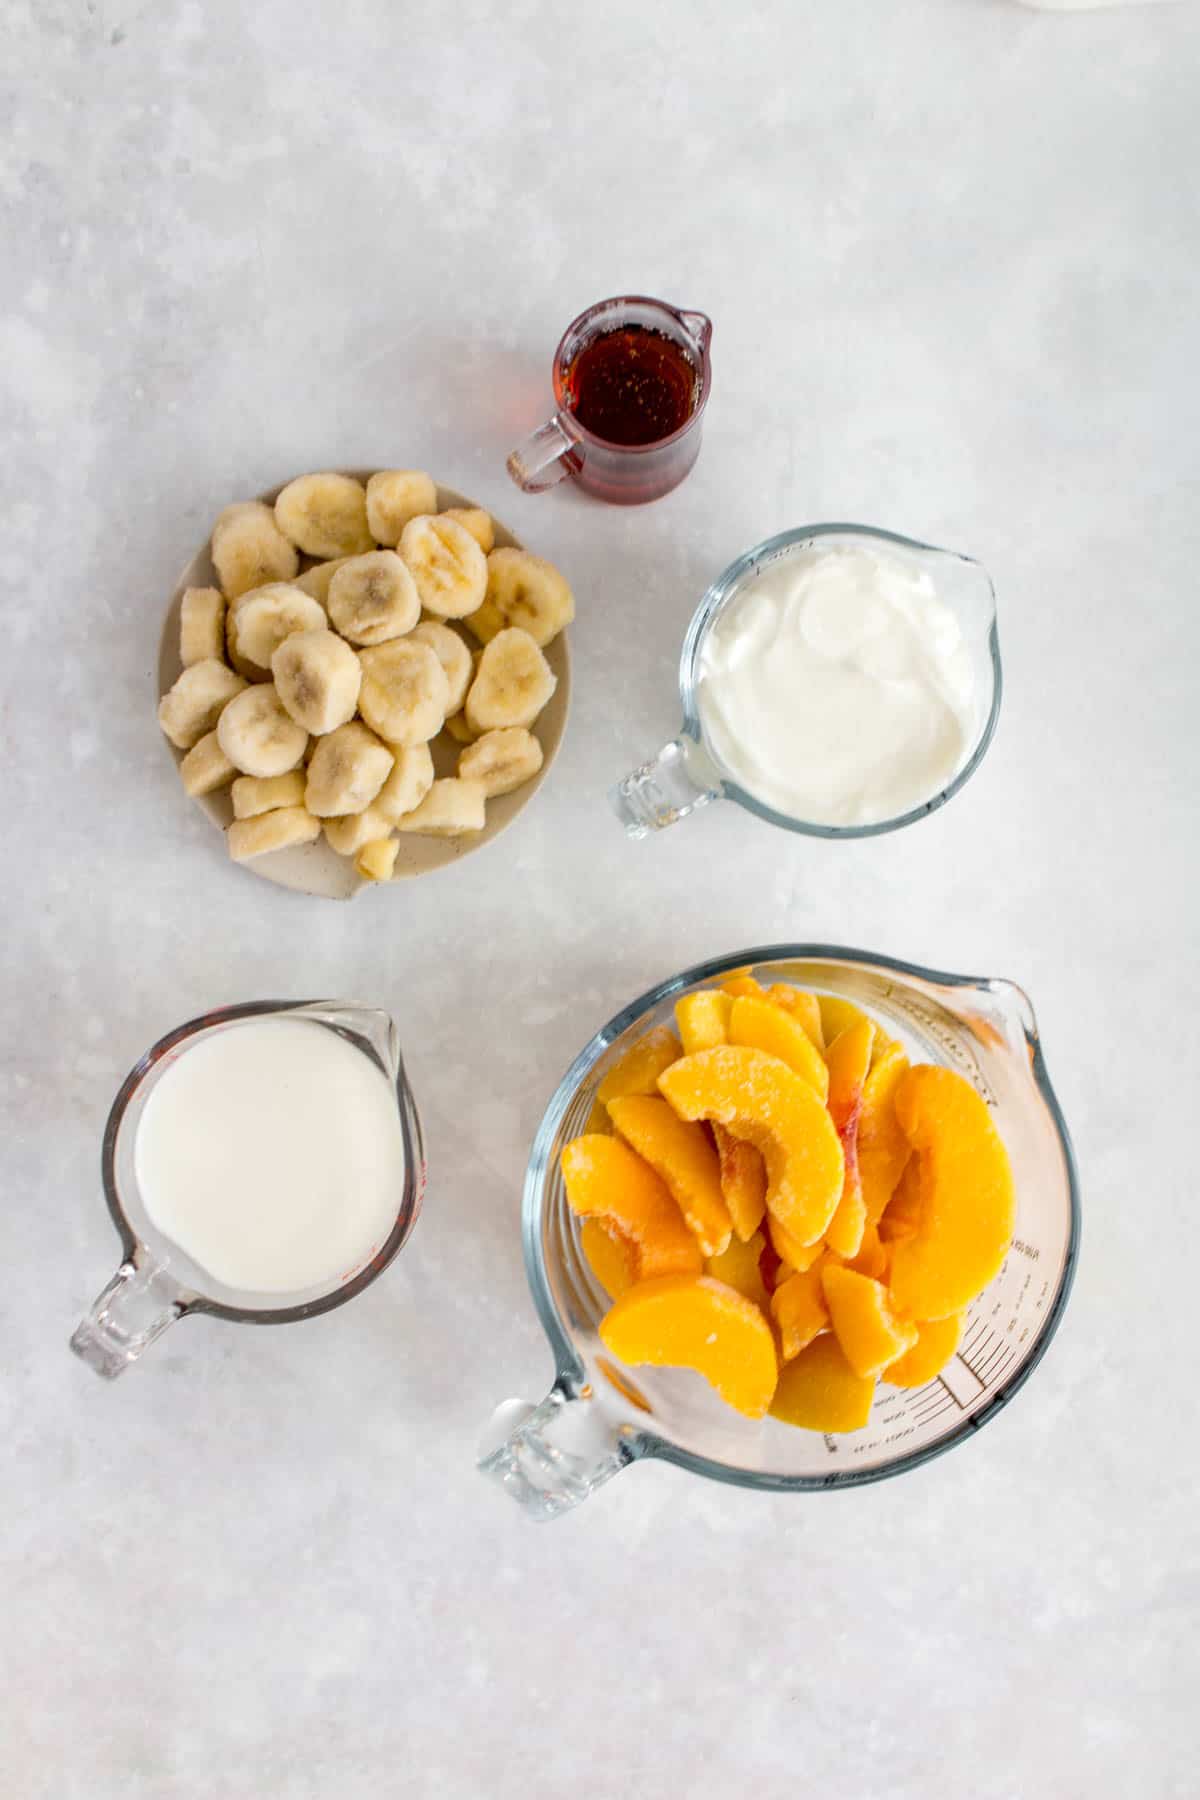 Ingredients needed to make peach banana smoothies.